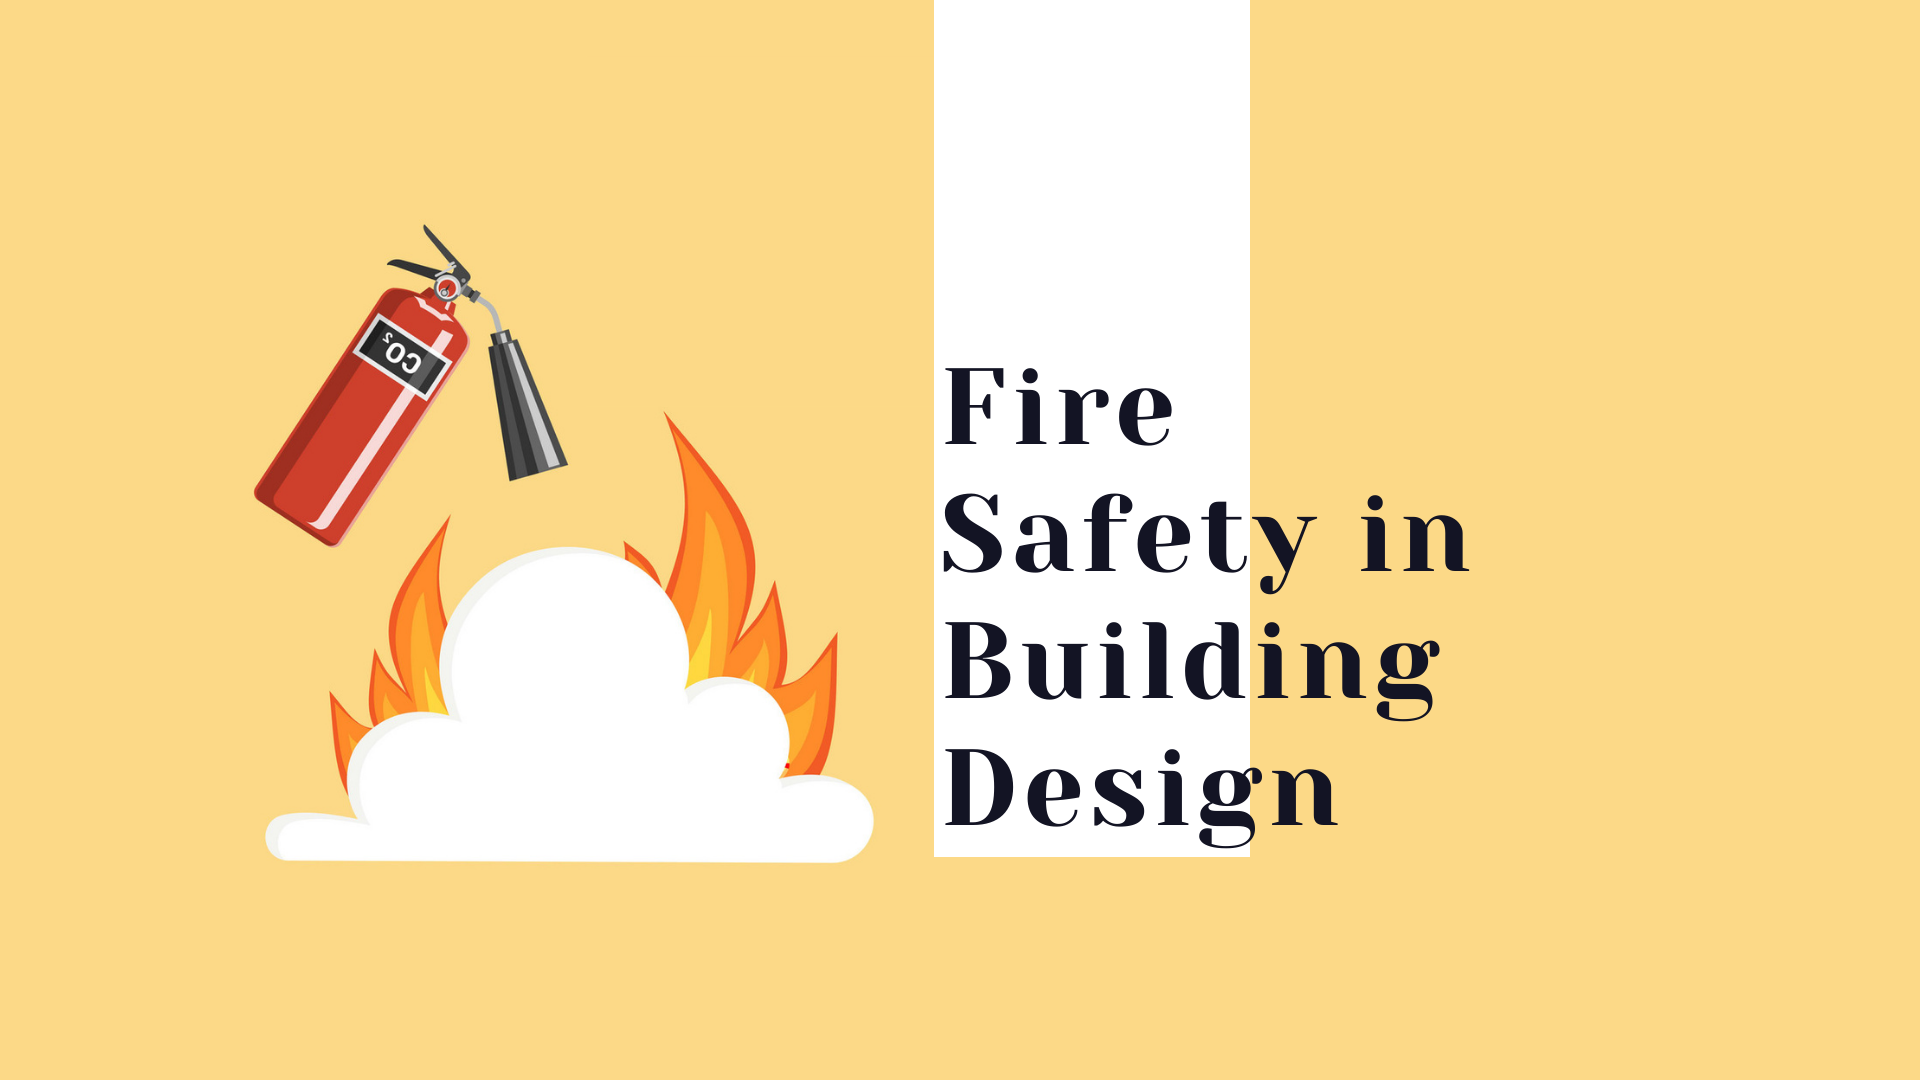 Fire safety in Building Design Course Image